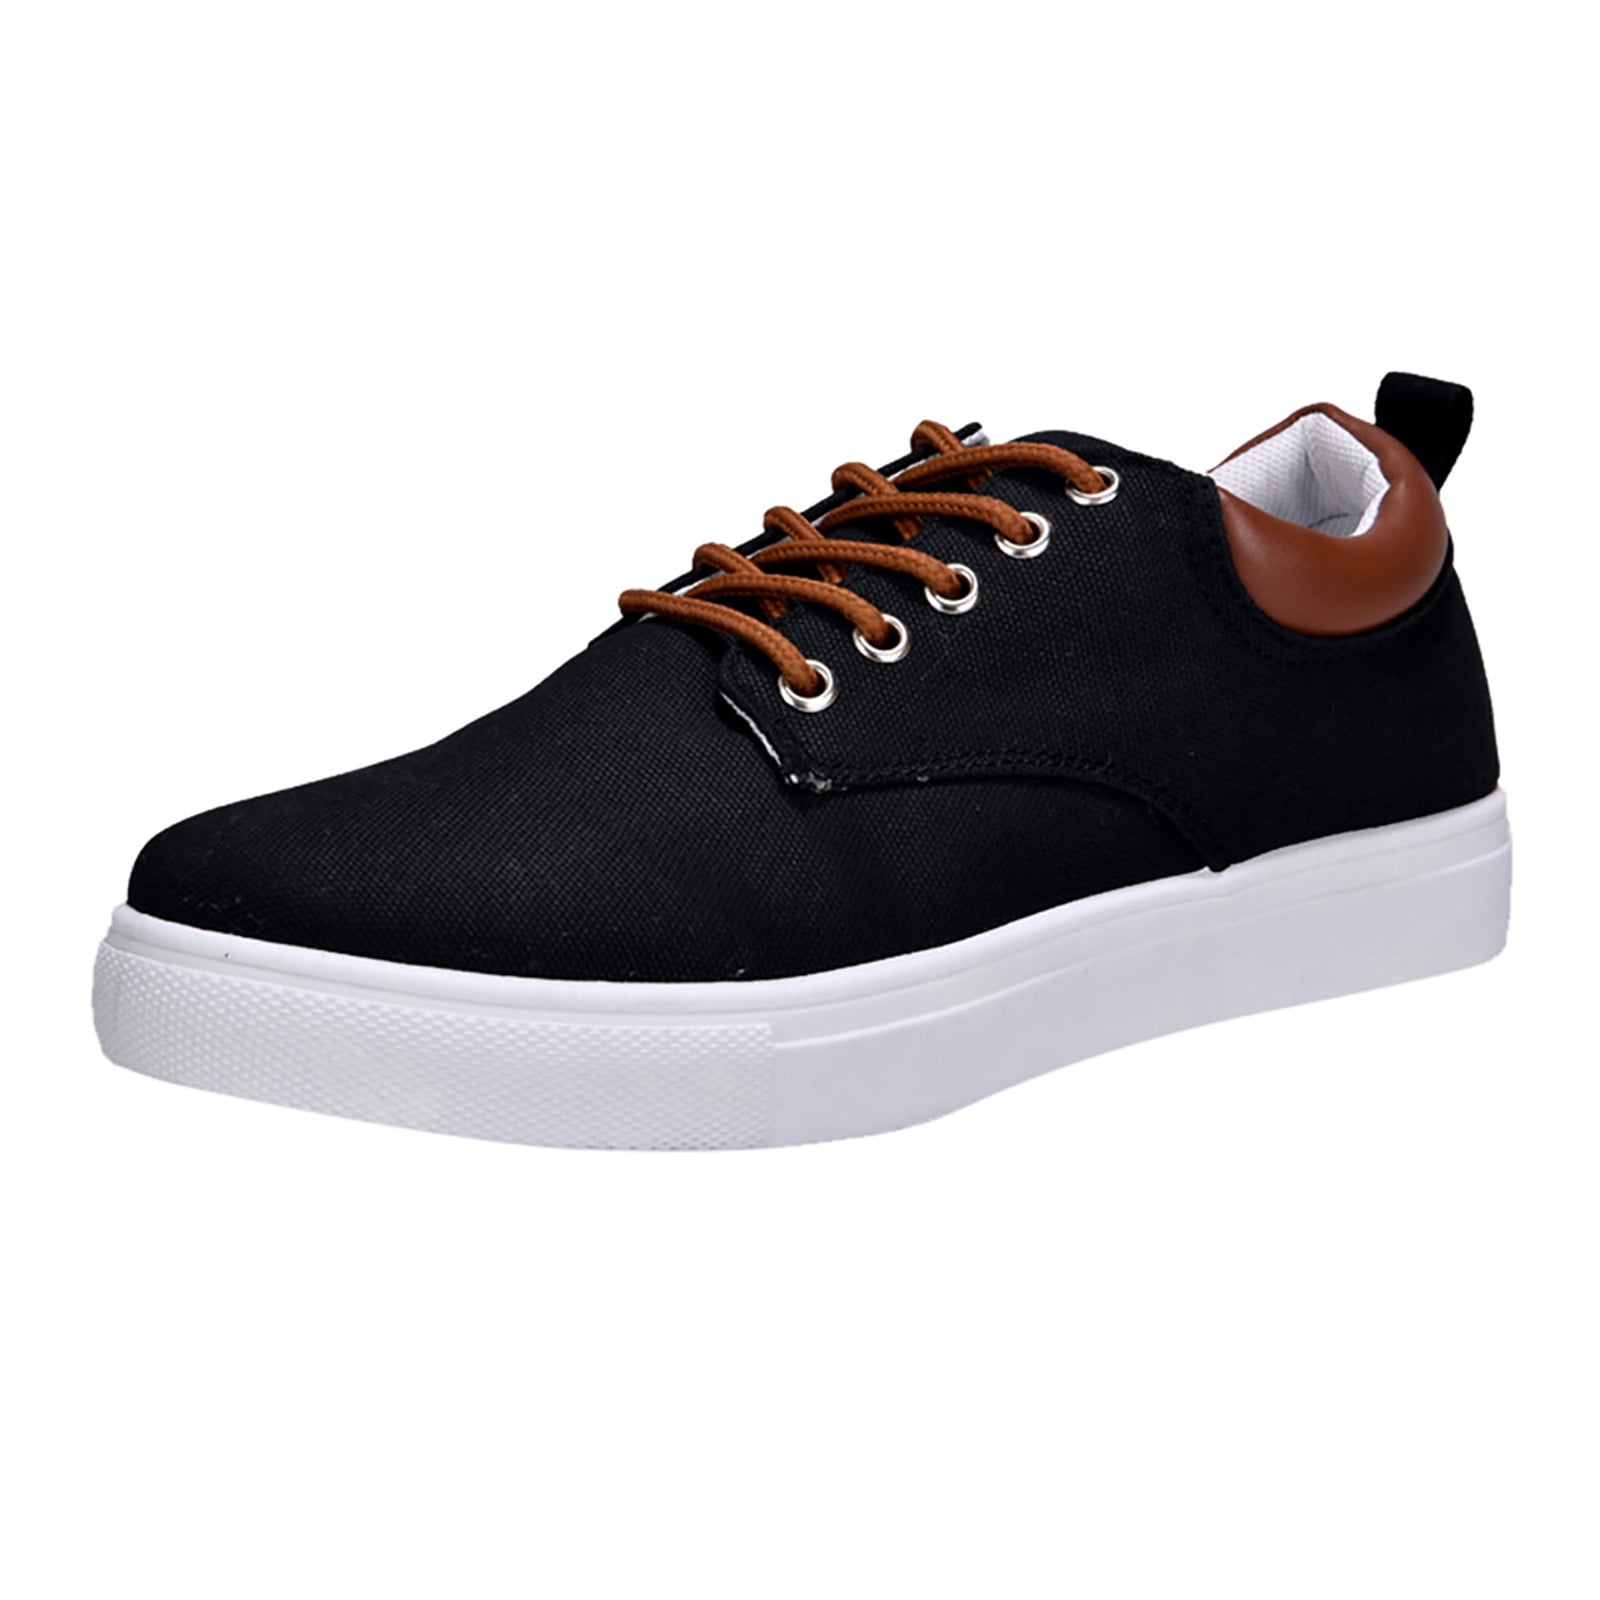 Mens Sneakers Low Top Canvas Walking Lace Up Casual Shoes - Walmart.com